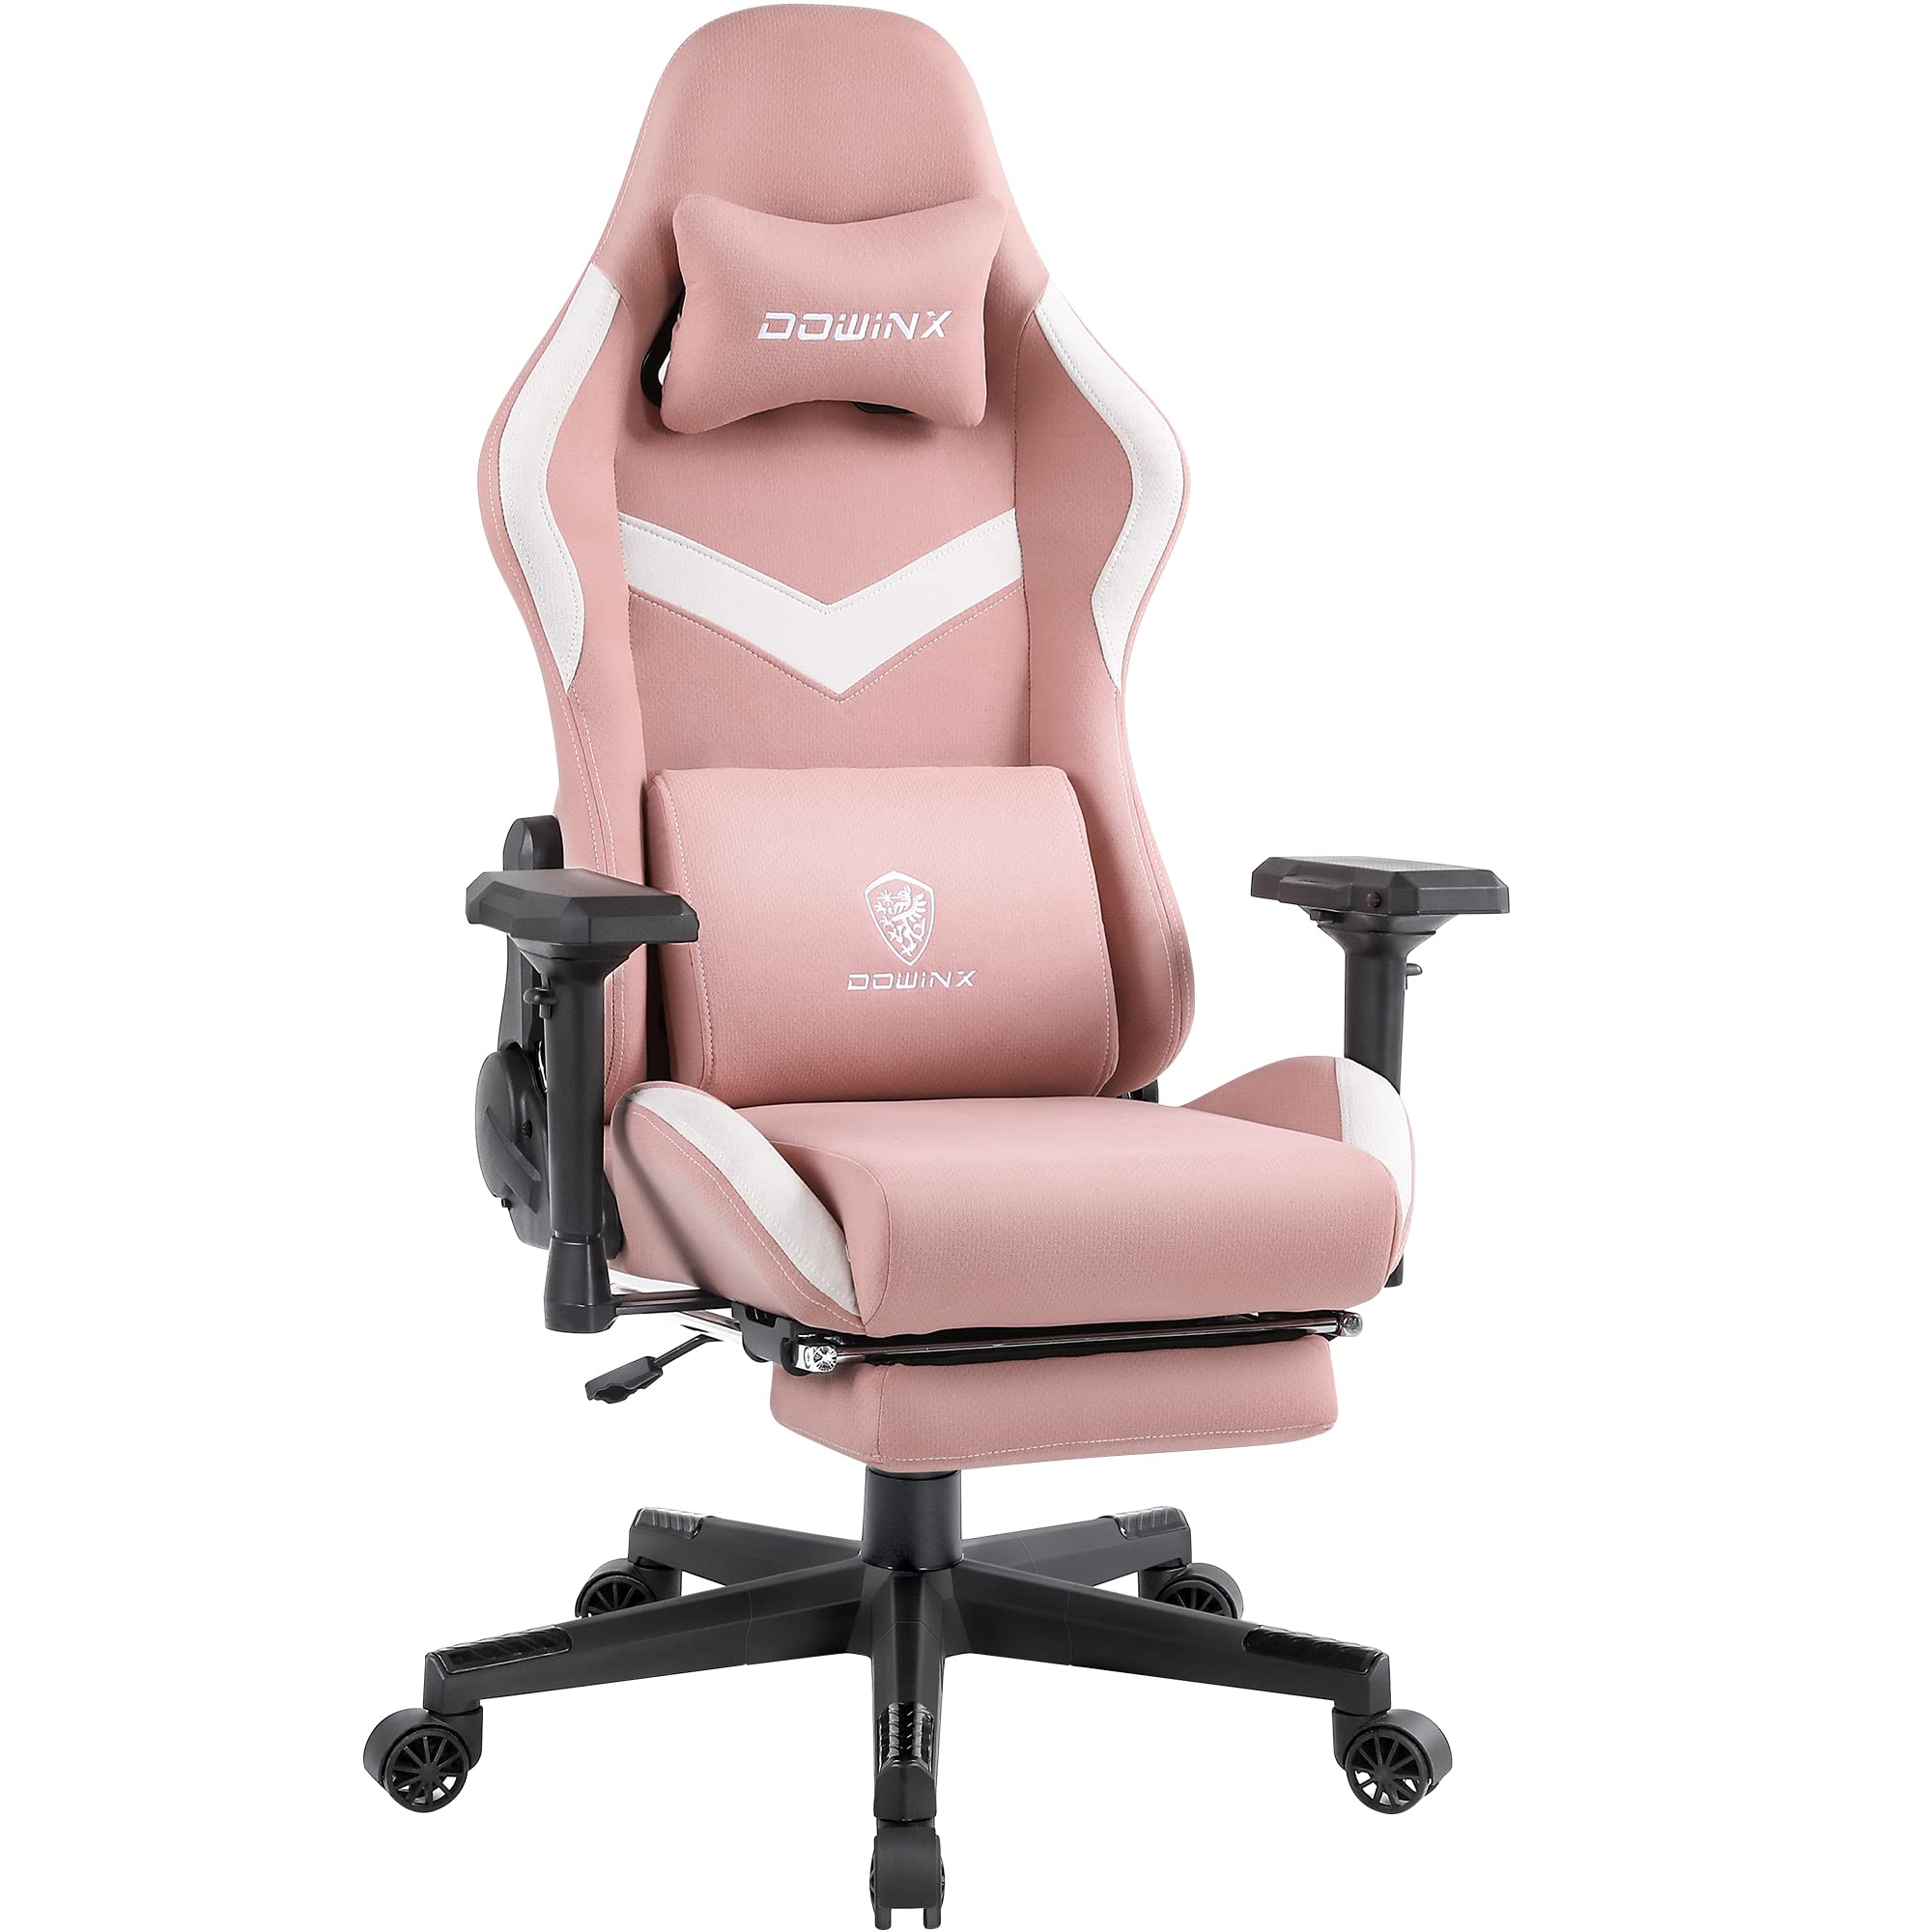 Dowinx + Dowinx Gaming Chair